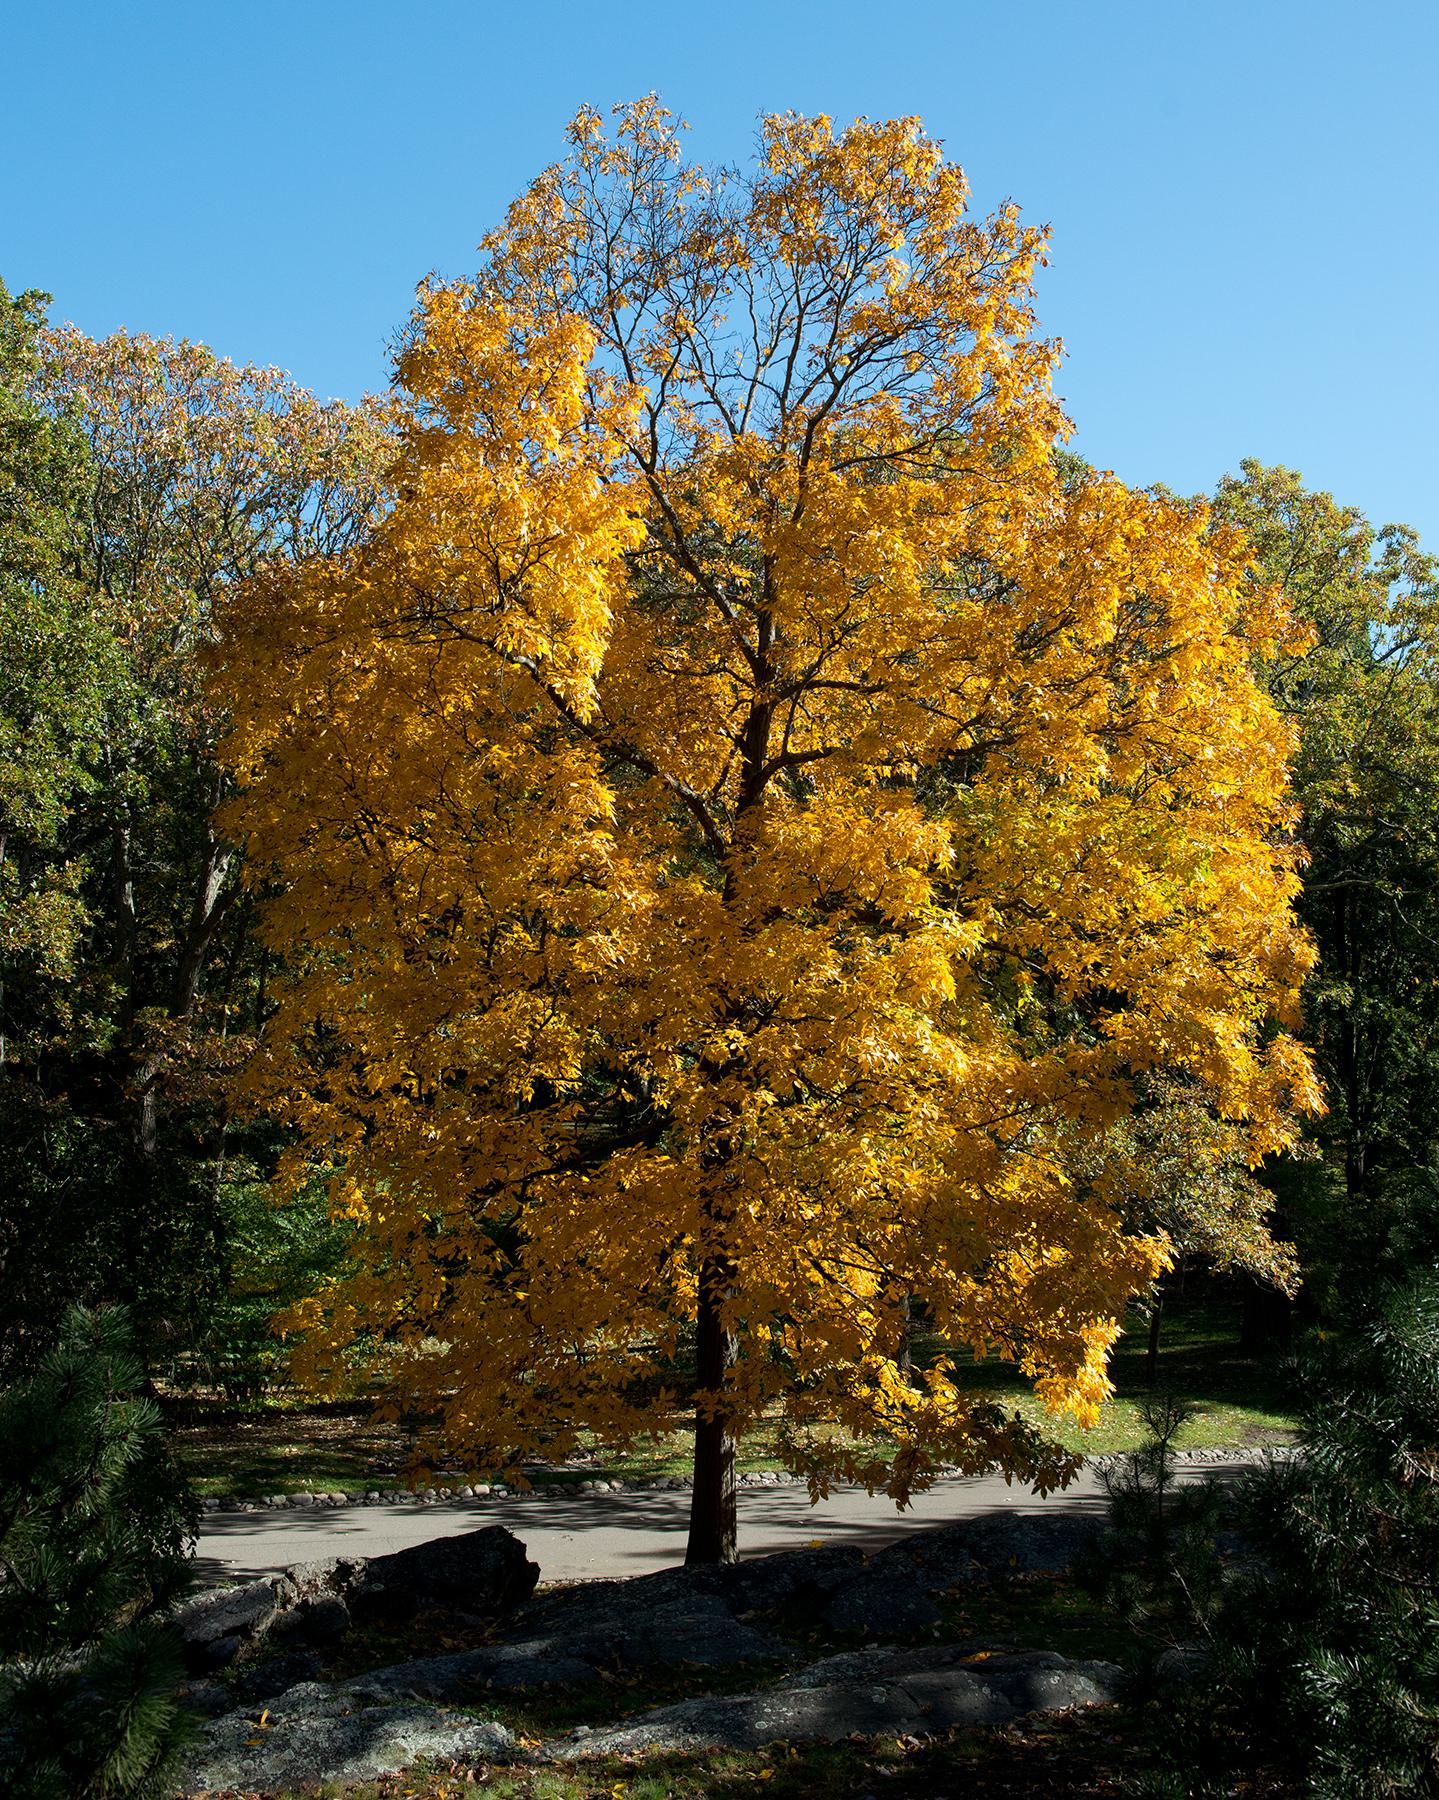 orange-yellow leaves with dark-brown branches and trunk